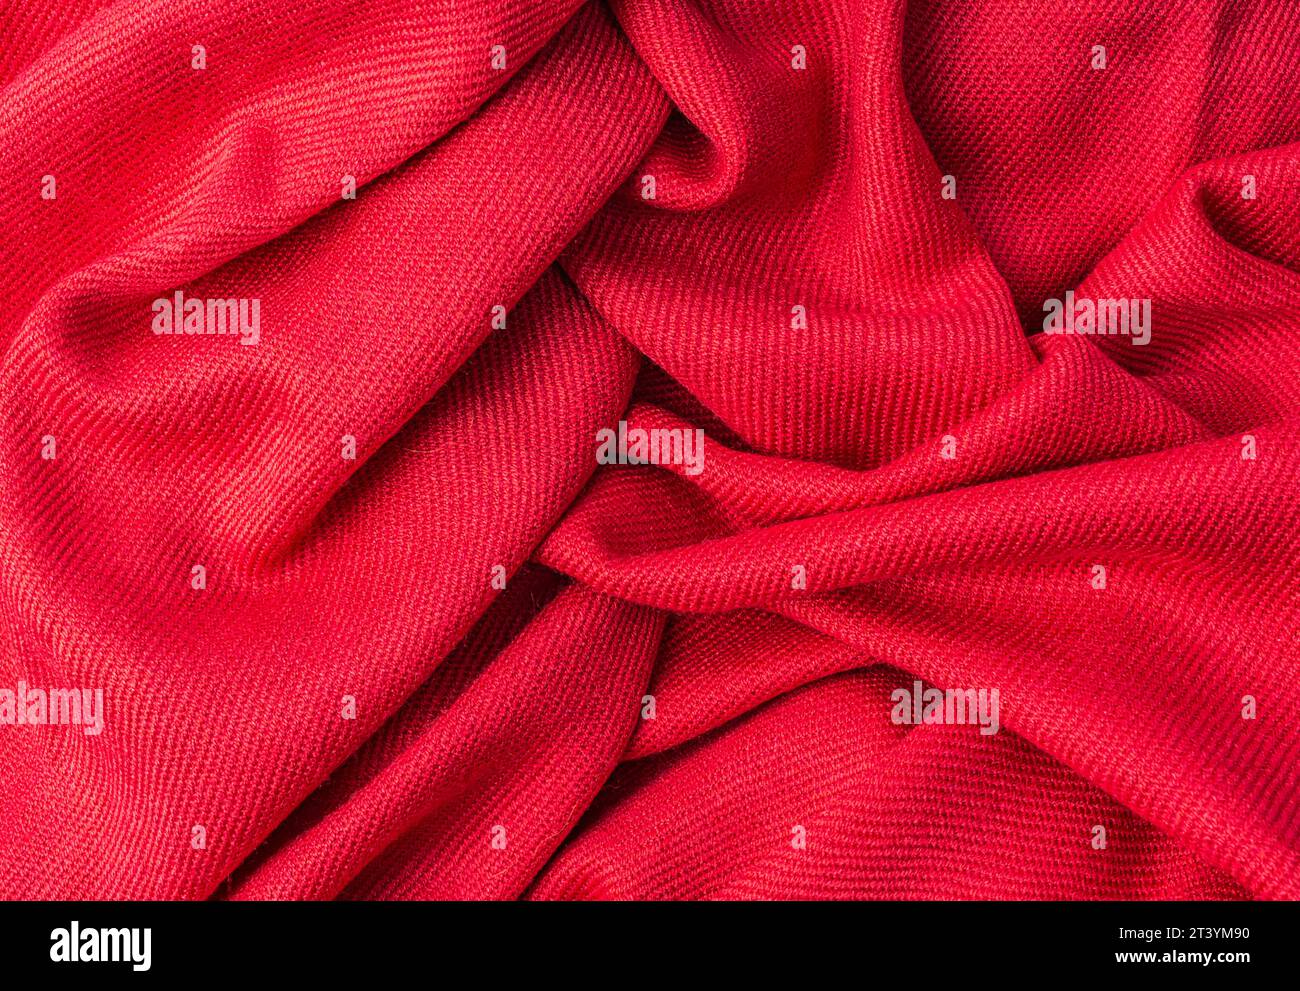 wrinkled pink fabric texture background closeup Stock Photo